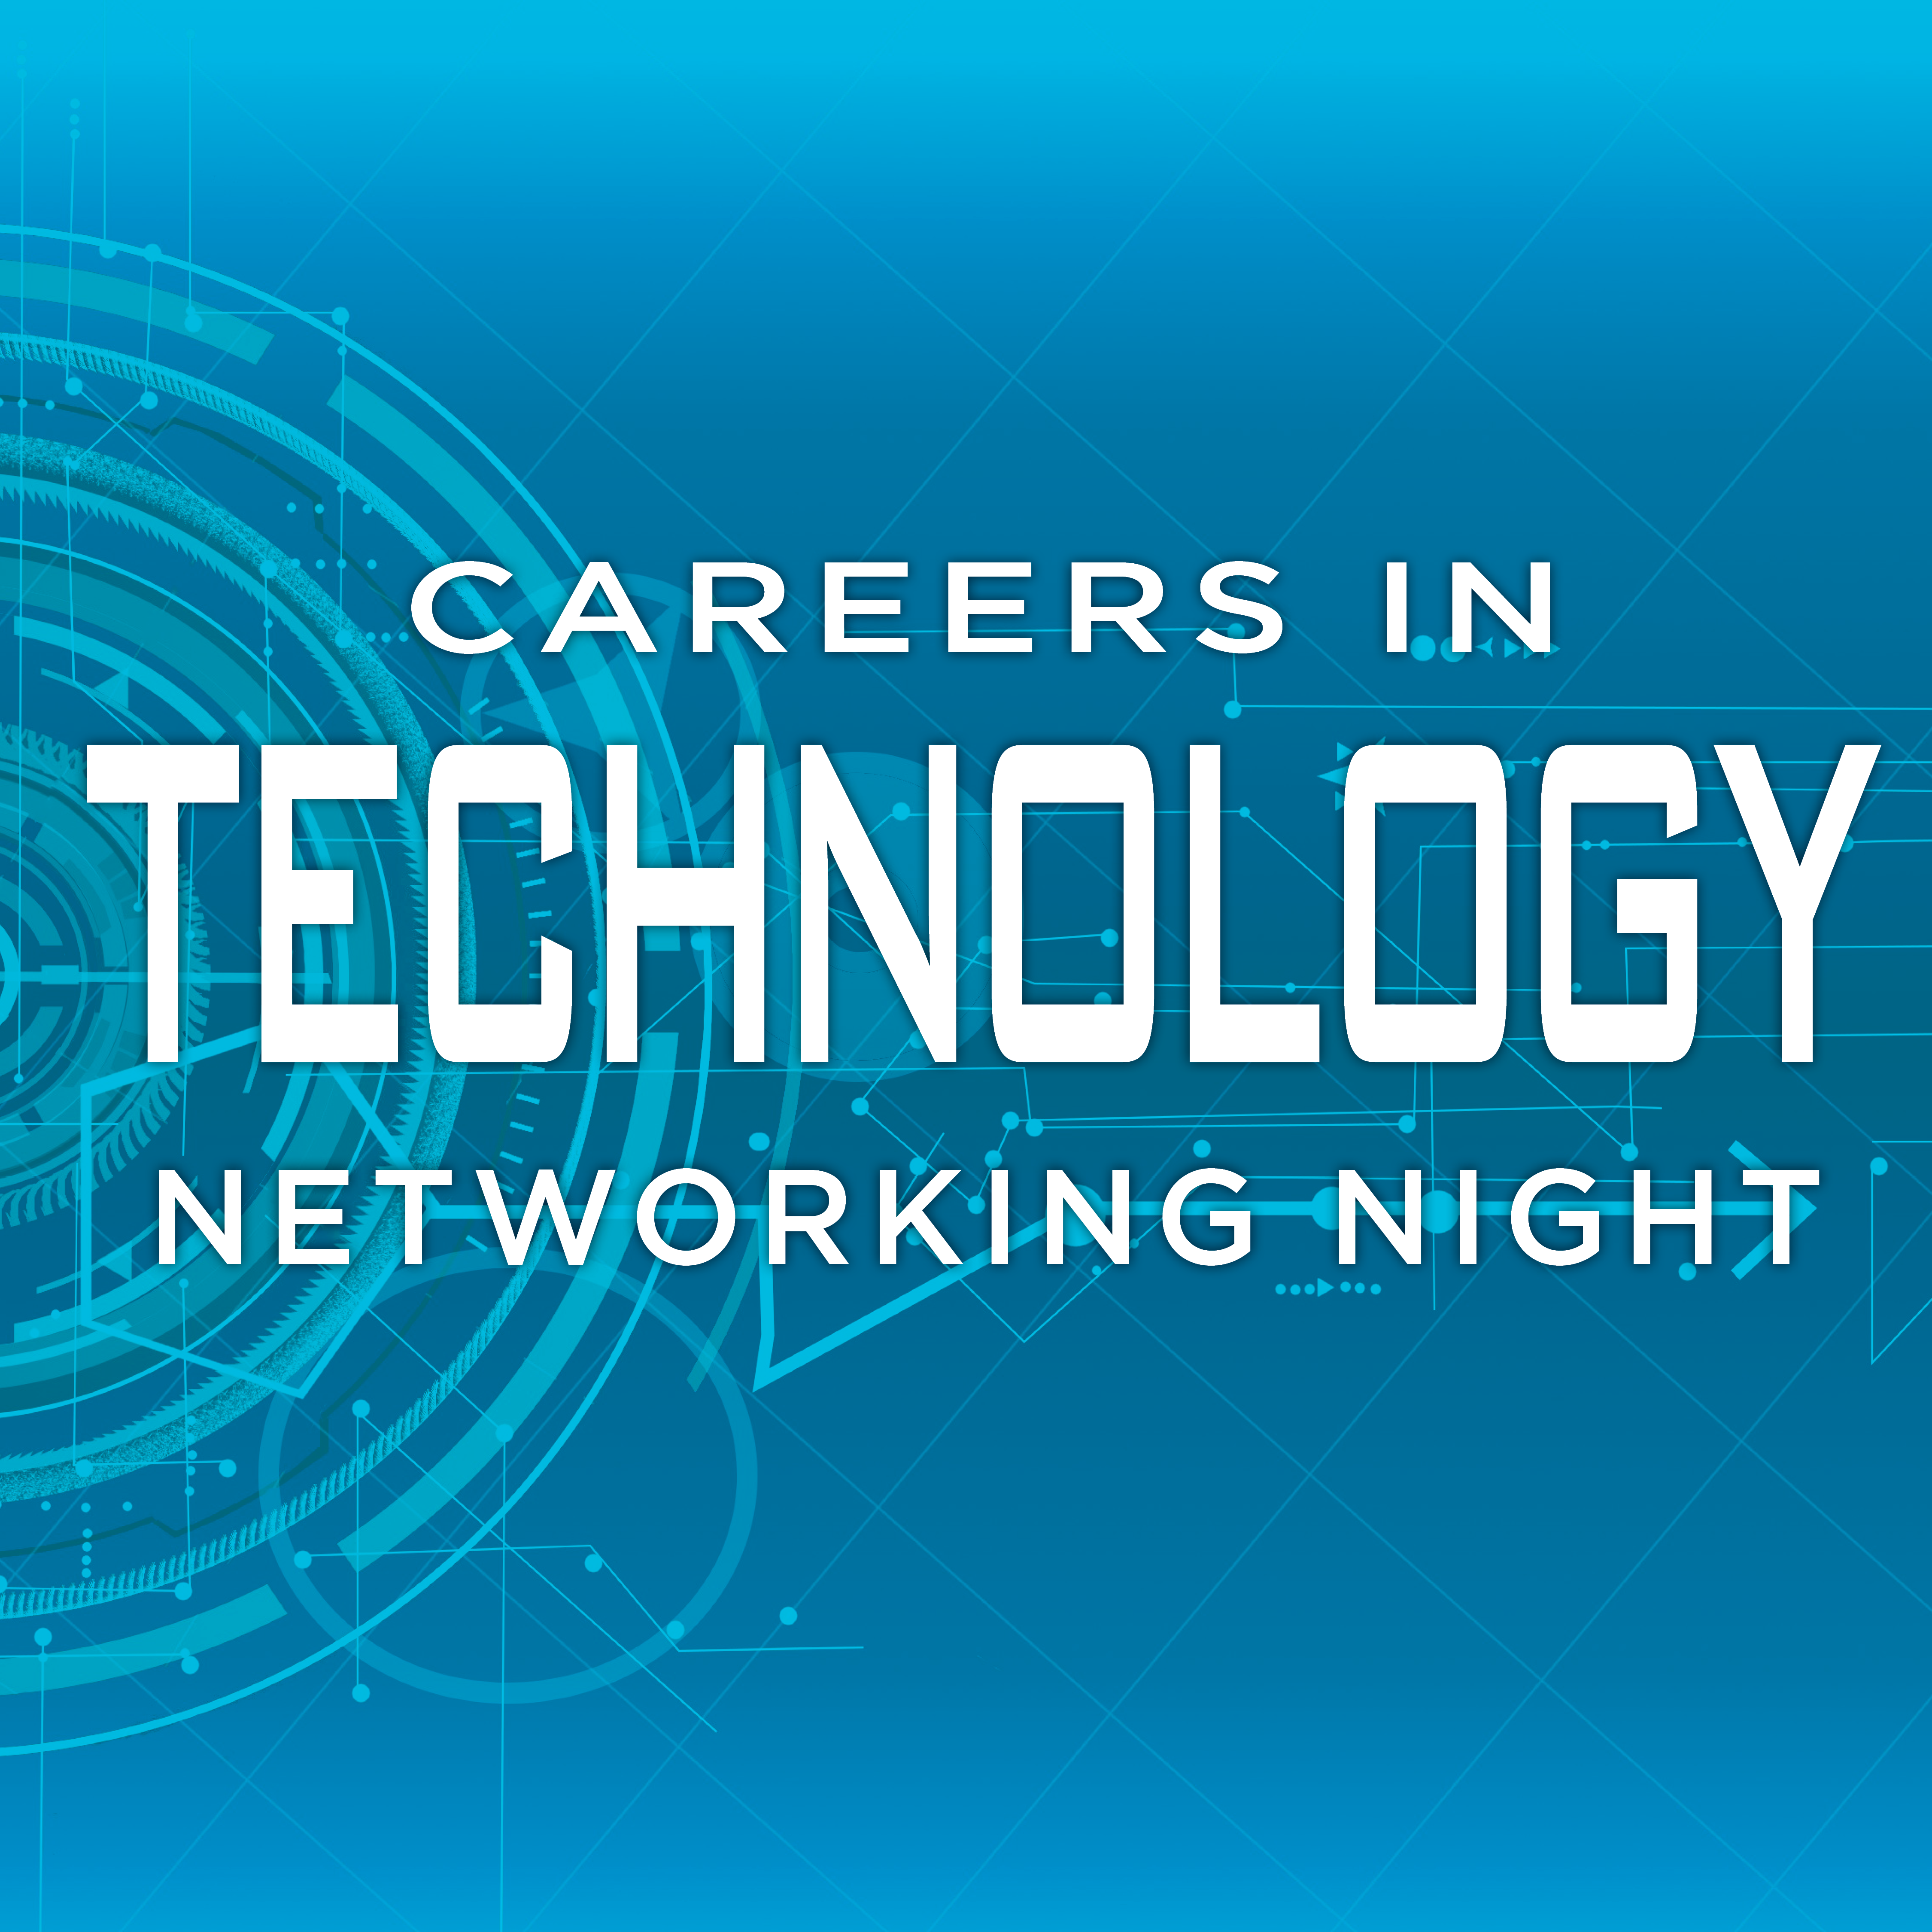 Careers in Technology Networking Night logo